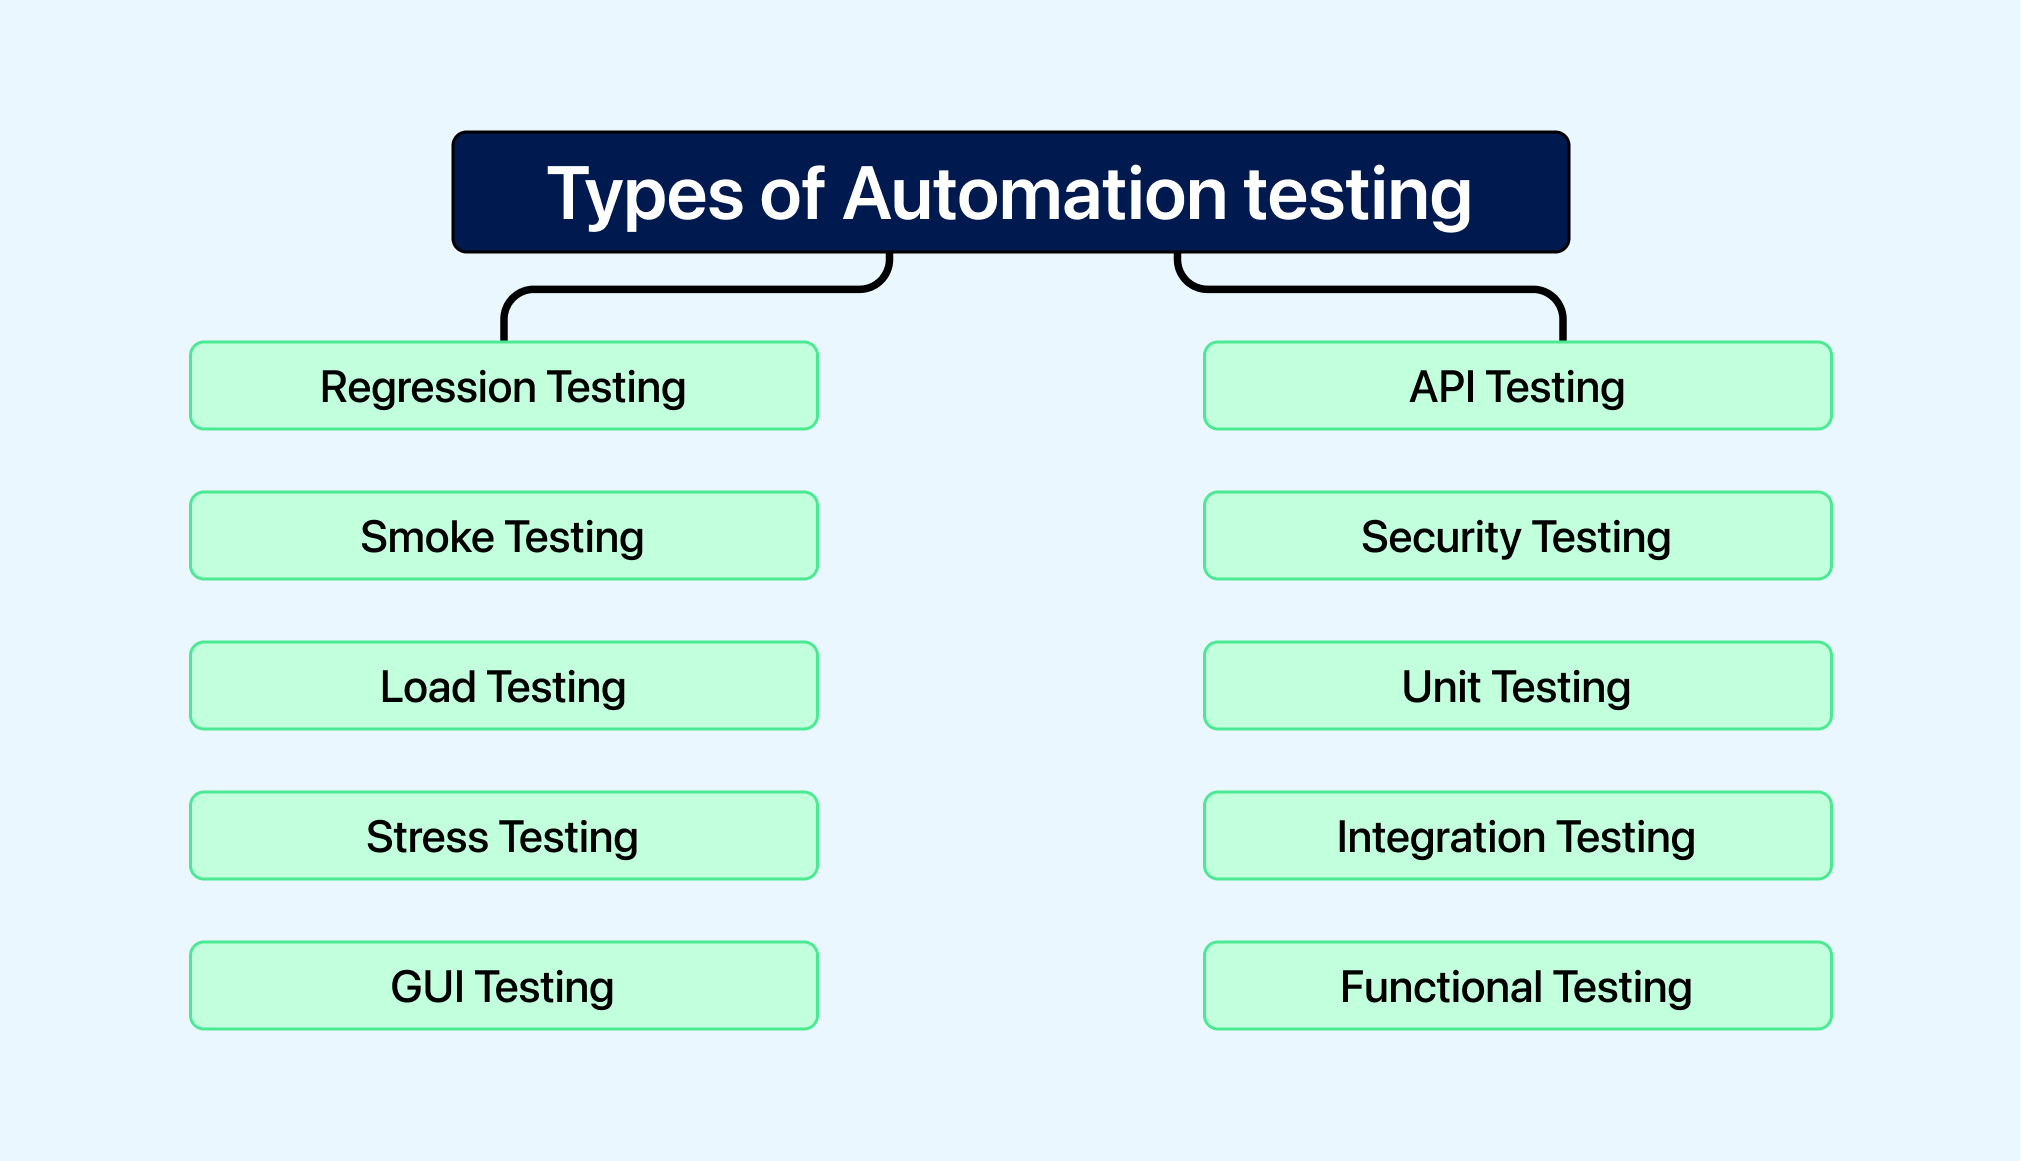 Types of Automation testing